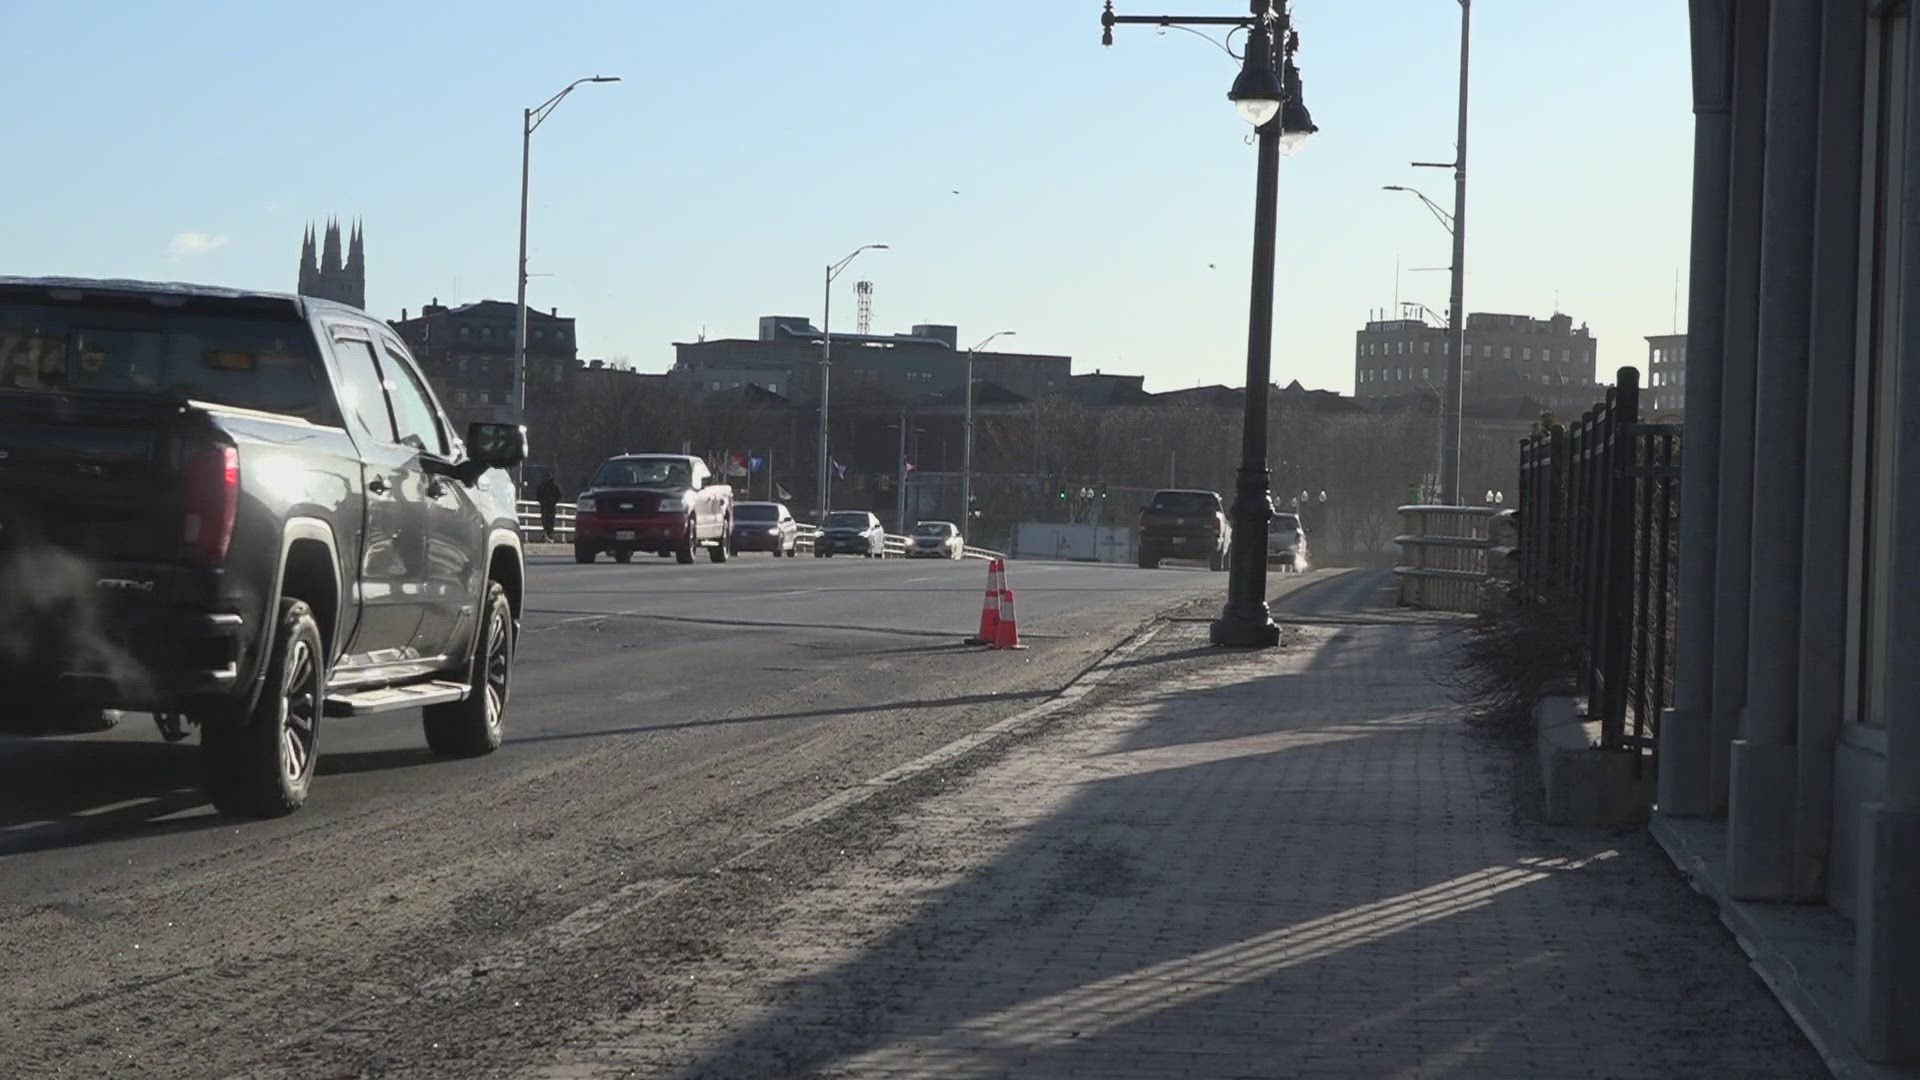 This first phase of the project, where one of the four traffic lanes will be fully closed to traffic, is expected to be completed by the end of July.